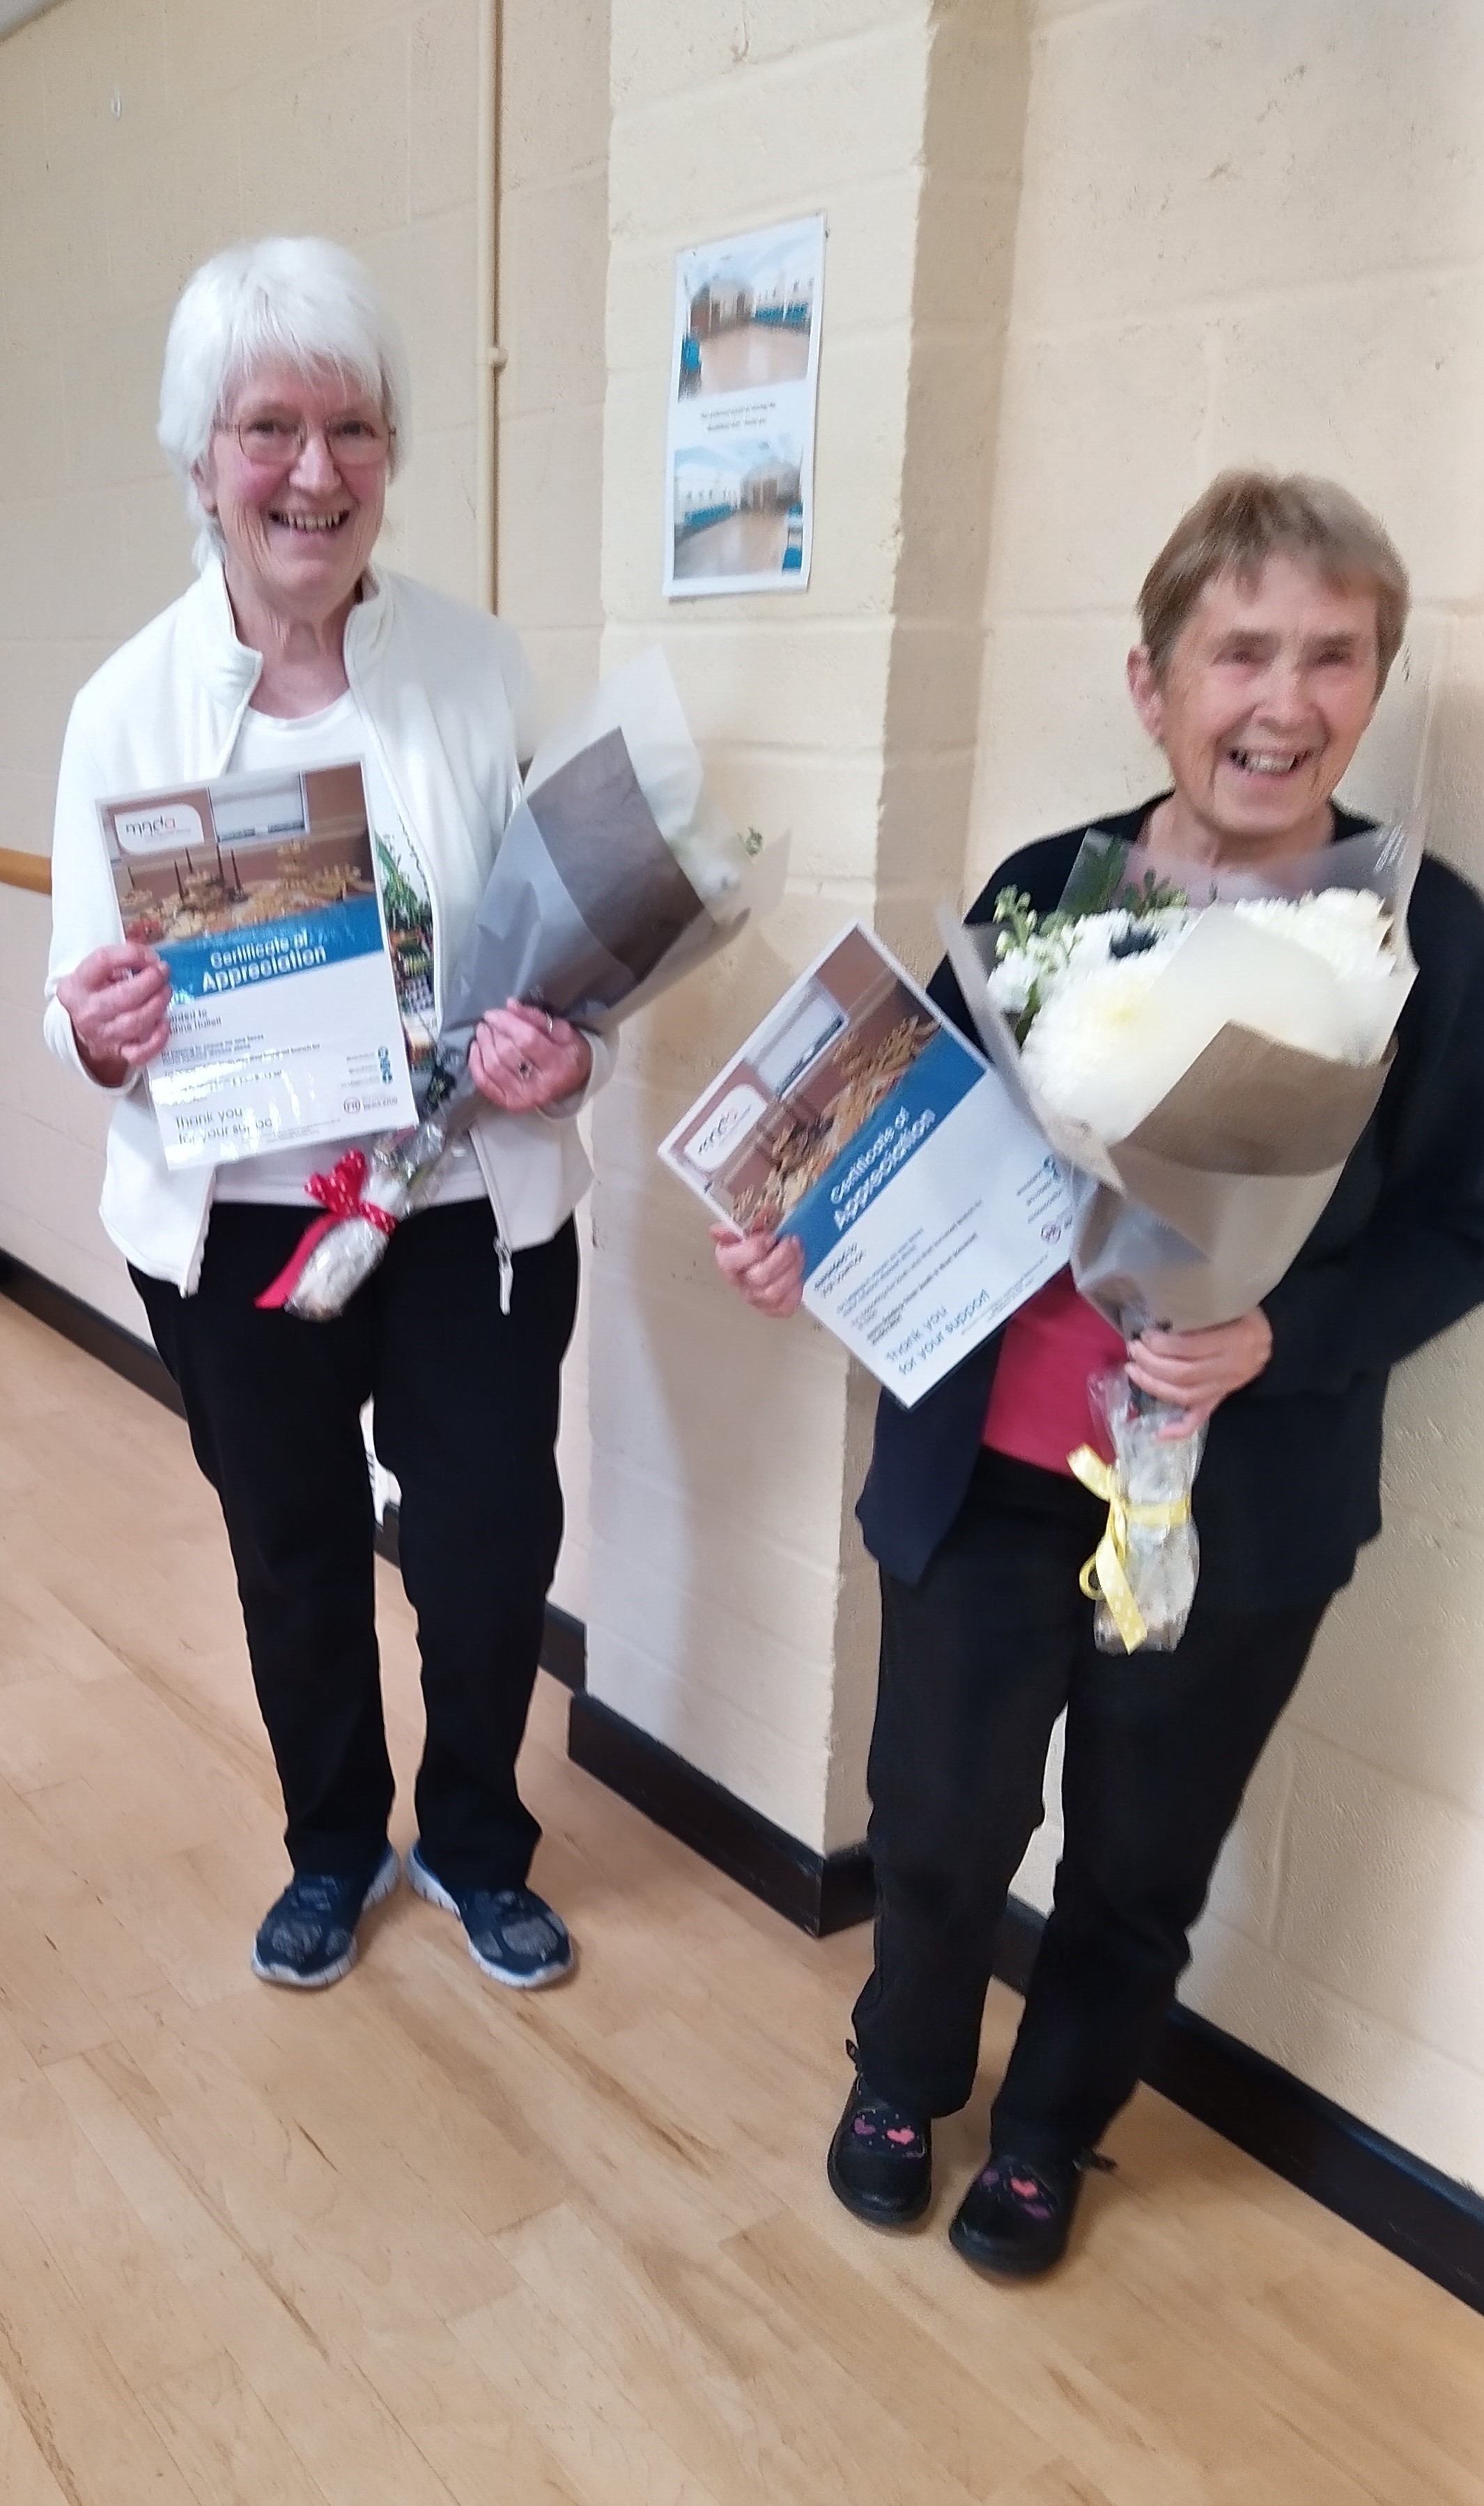 Daphne and Val smiling after receiving flowers and a certificate of appreciation